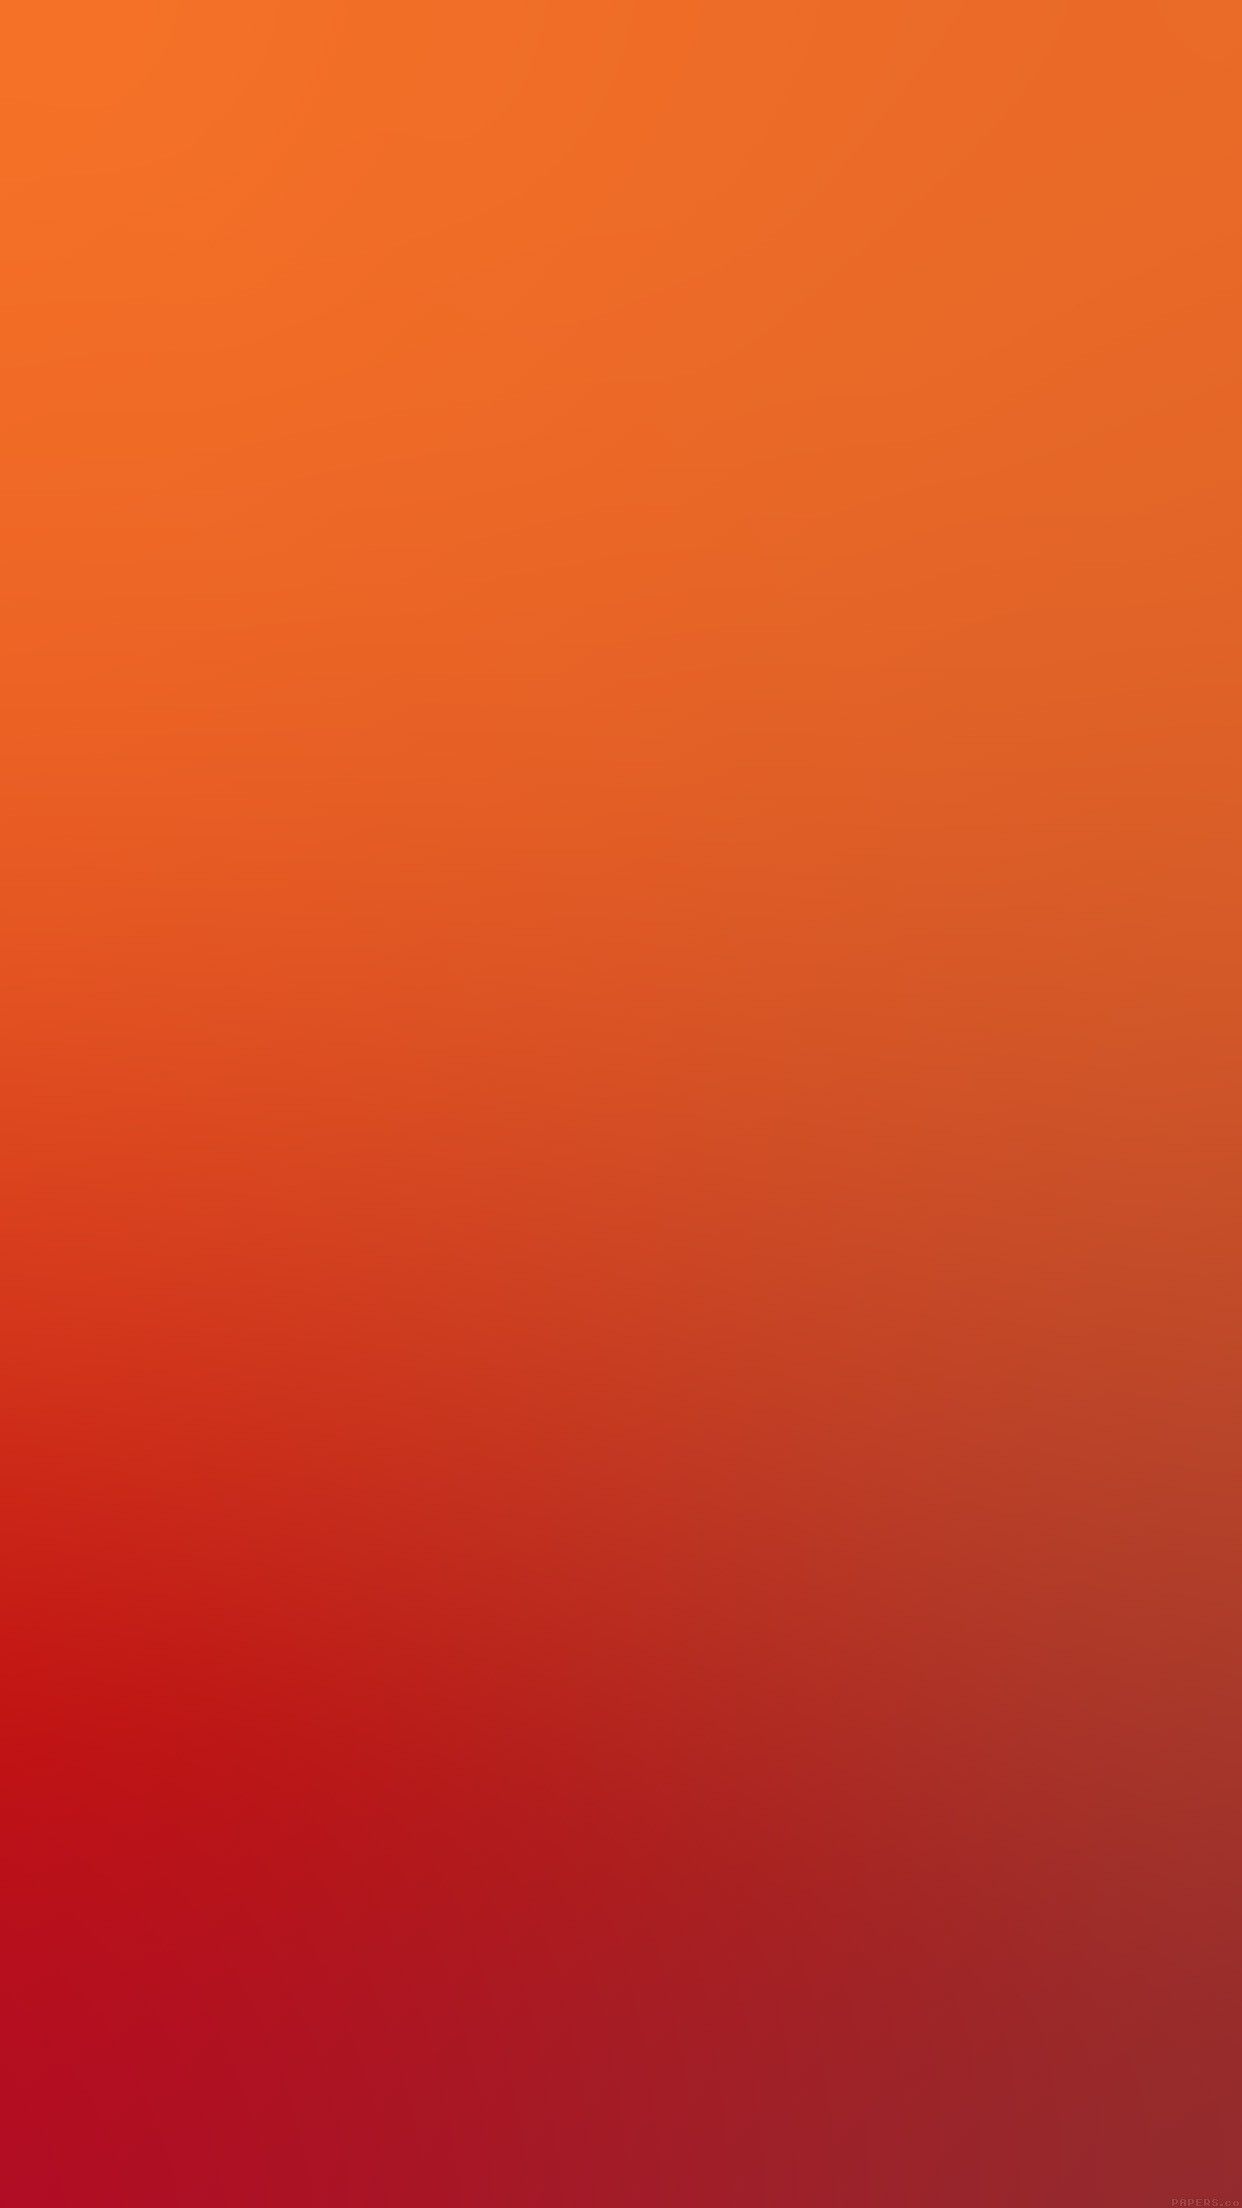 A red and orange background with no text - Orange